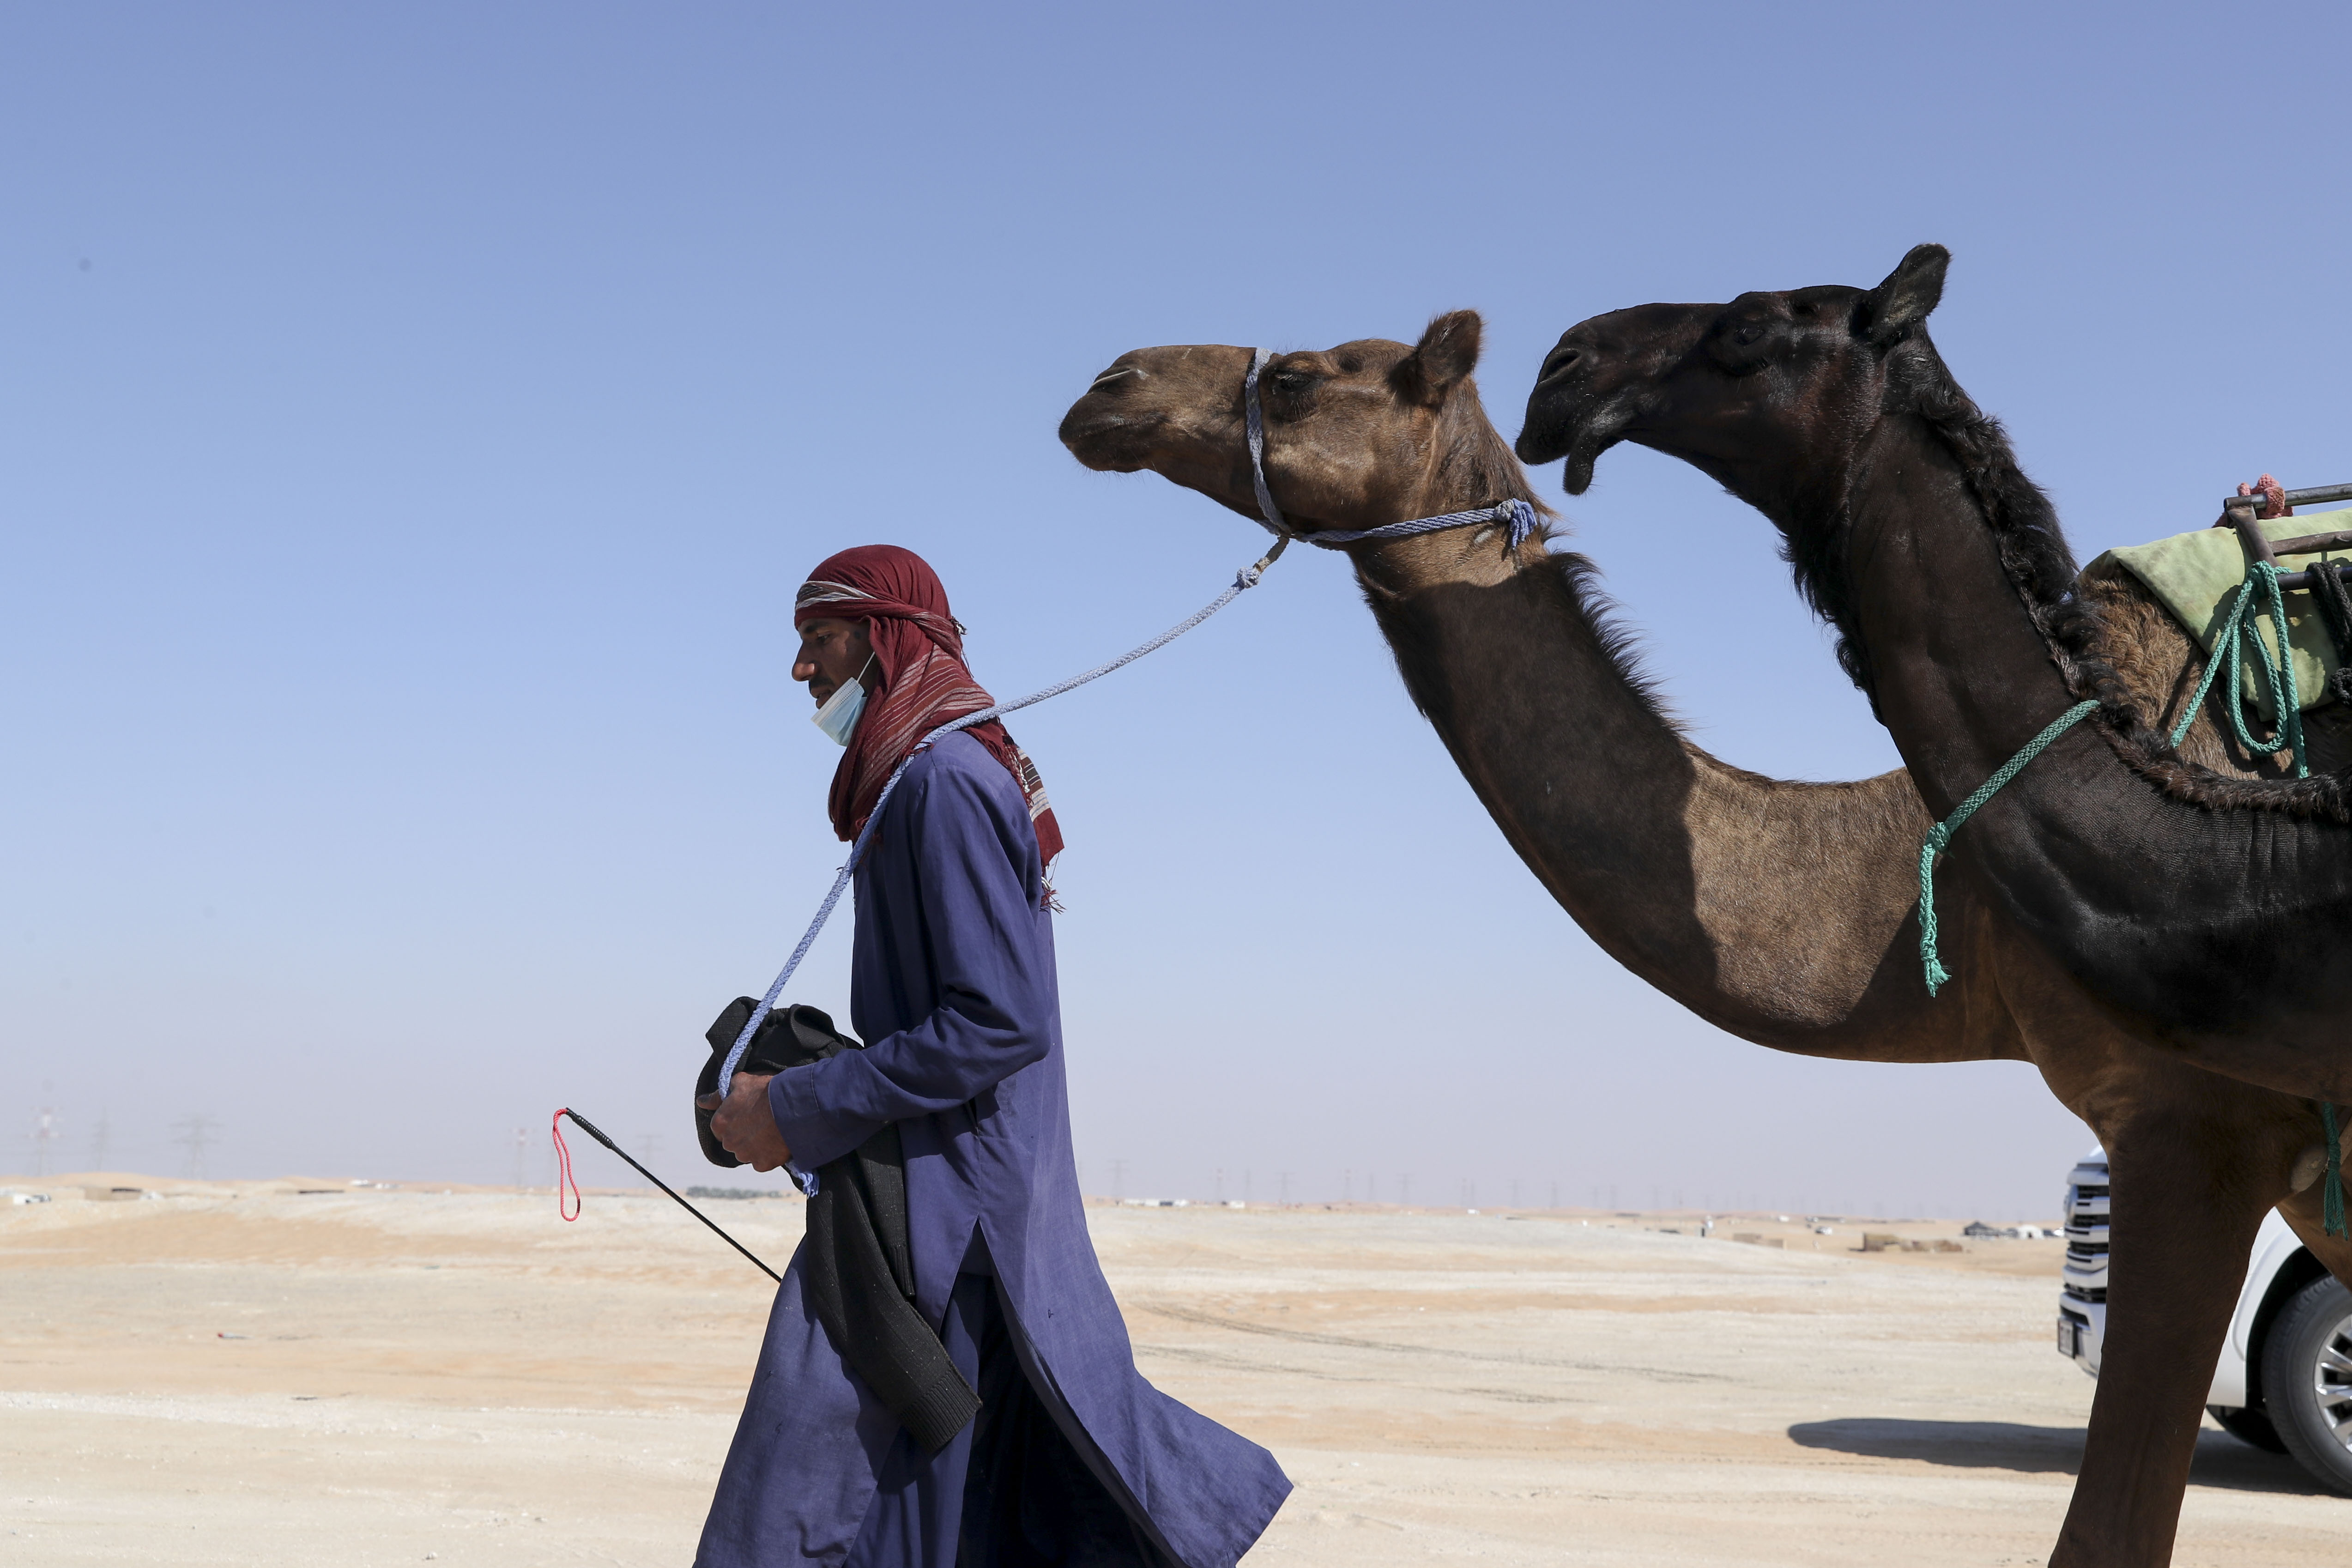 I brought my favorite Fashion to Figure dress with me to Abu Dhabi this  winter + no weight limit on camel ride… felt beautiful. : r/PlusSize